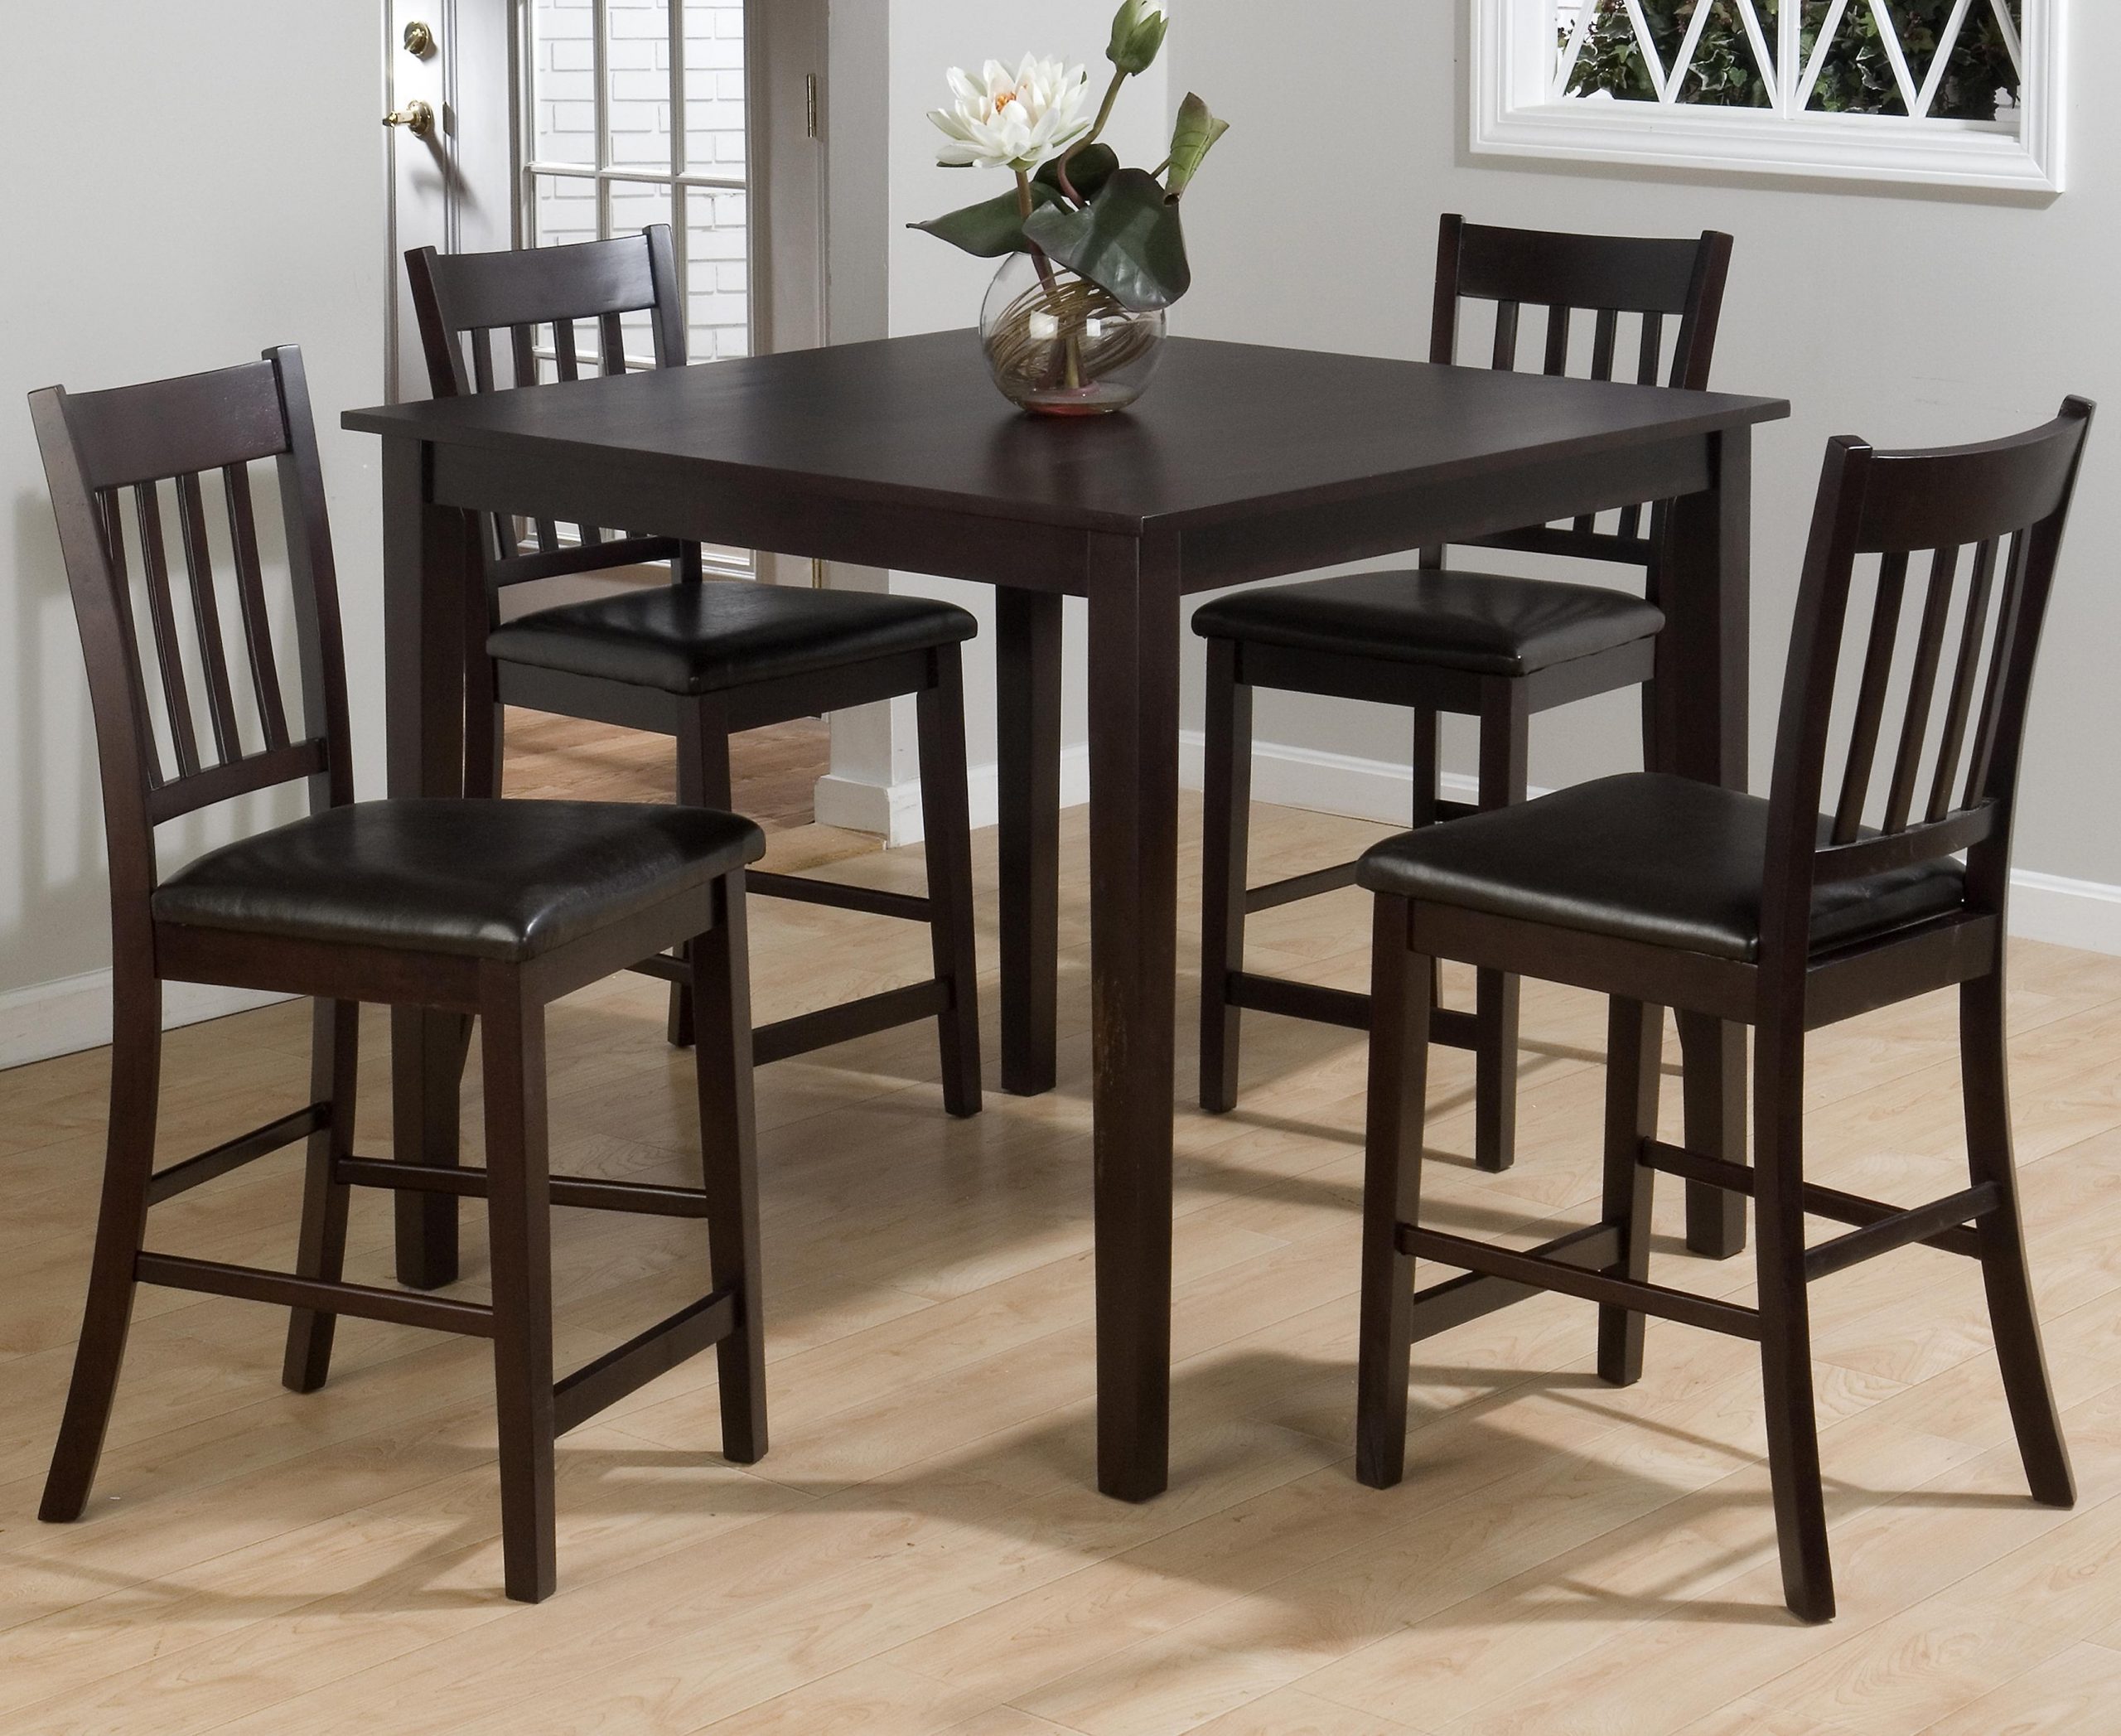 Big Lots Dining Room Tables Harlow